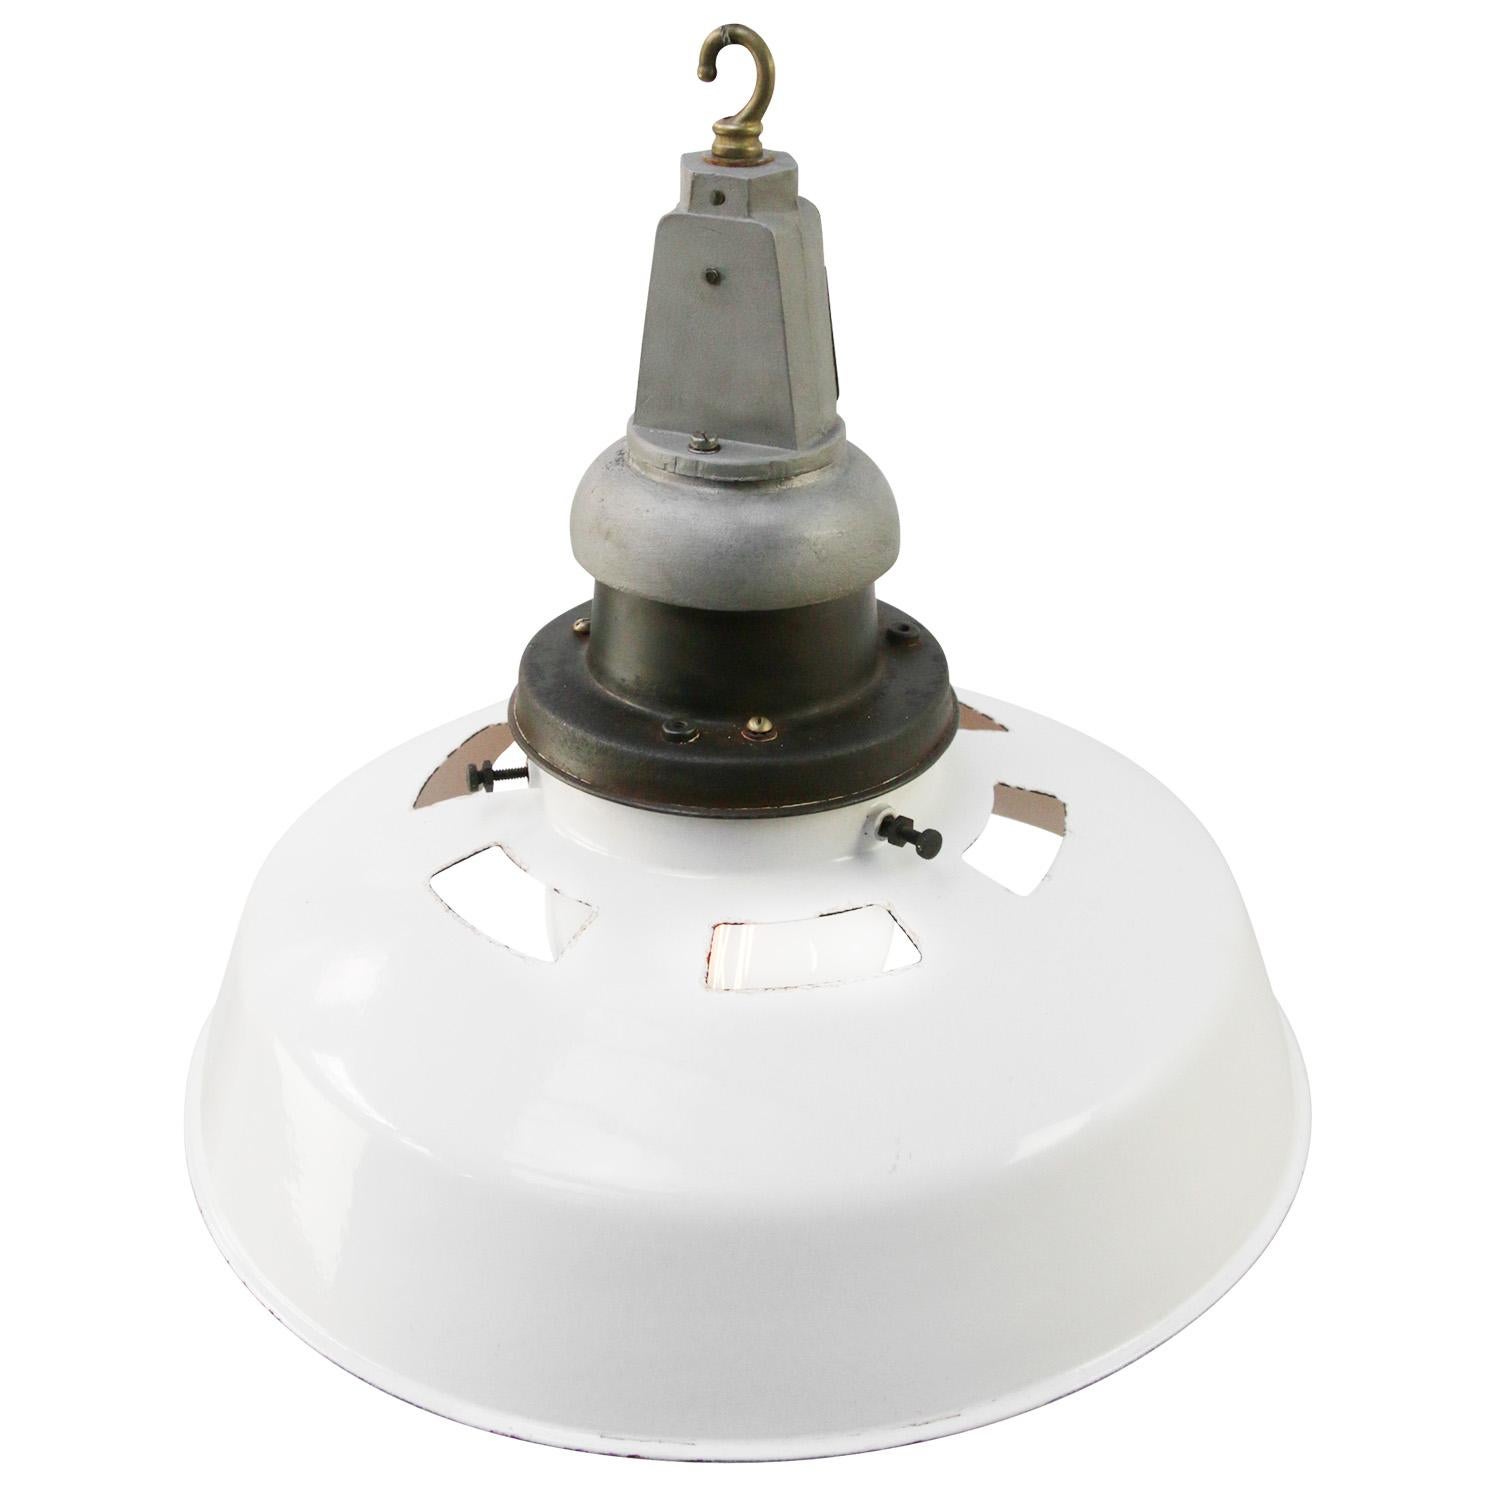 British industrial factory pendant light by Benjamin
White enamel white interior.
Metal top

Weight 2.10 kg / 4.6 lb

Priced per individual item. All lamps have been made suitable by international standards for incandescent light bulbs,